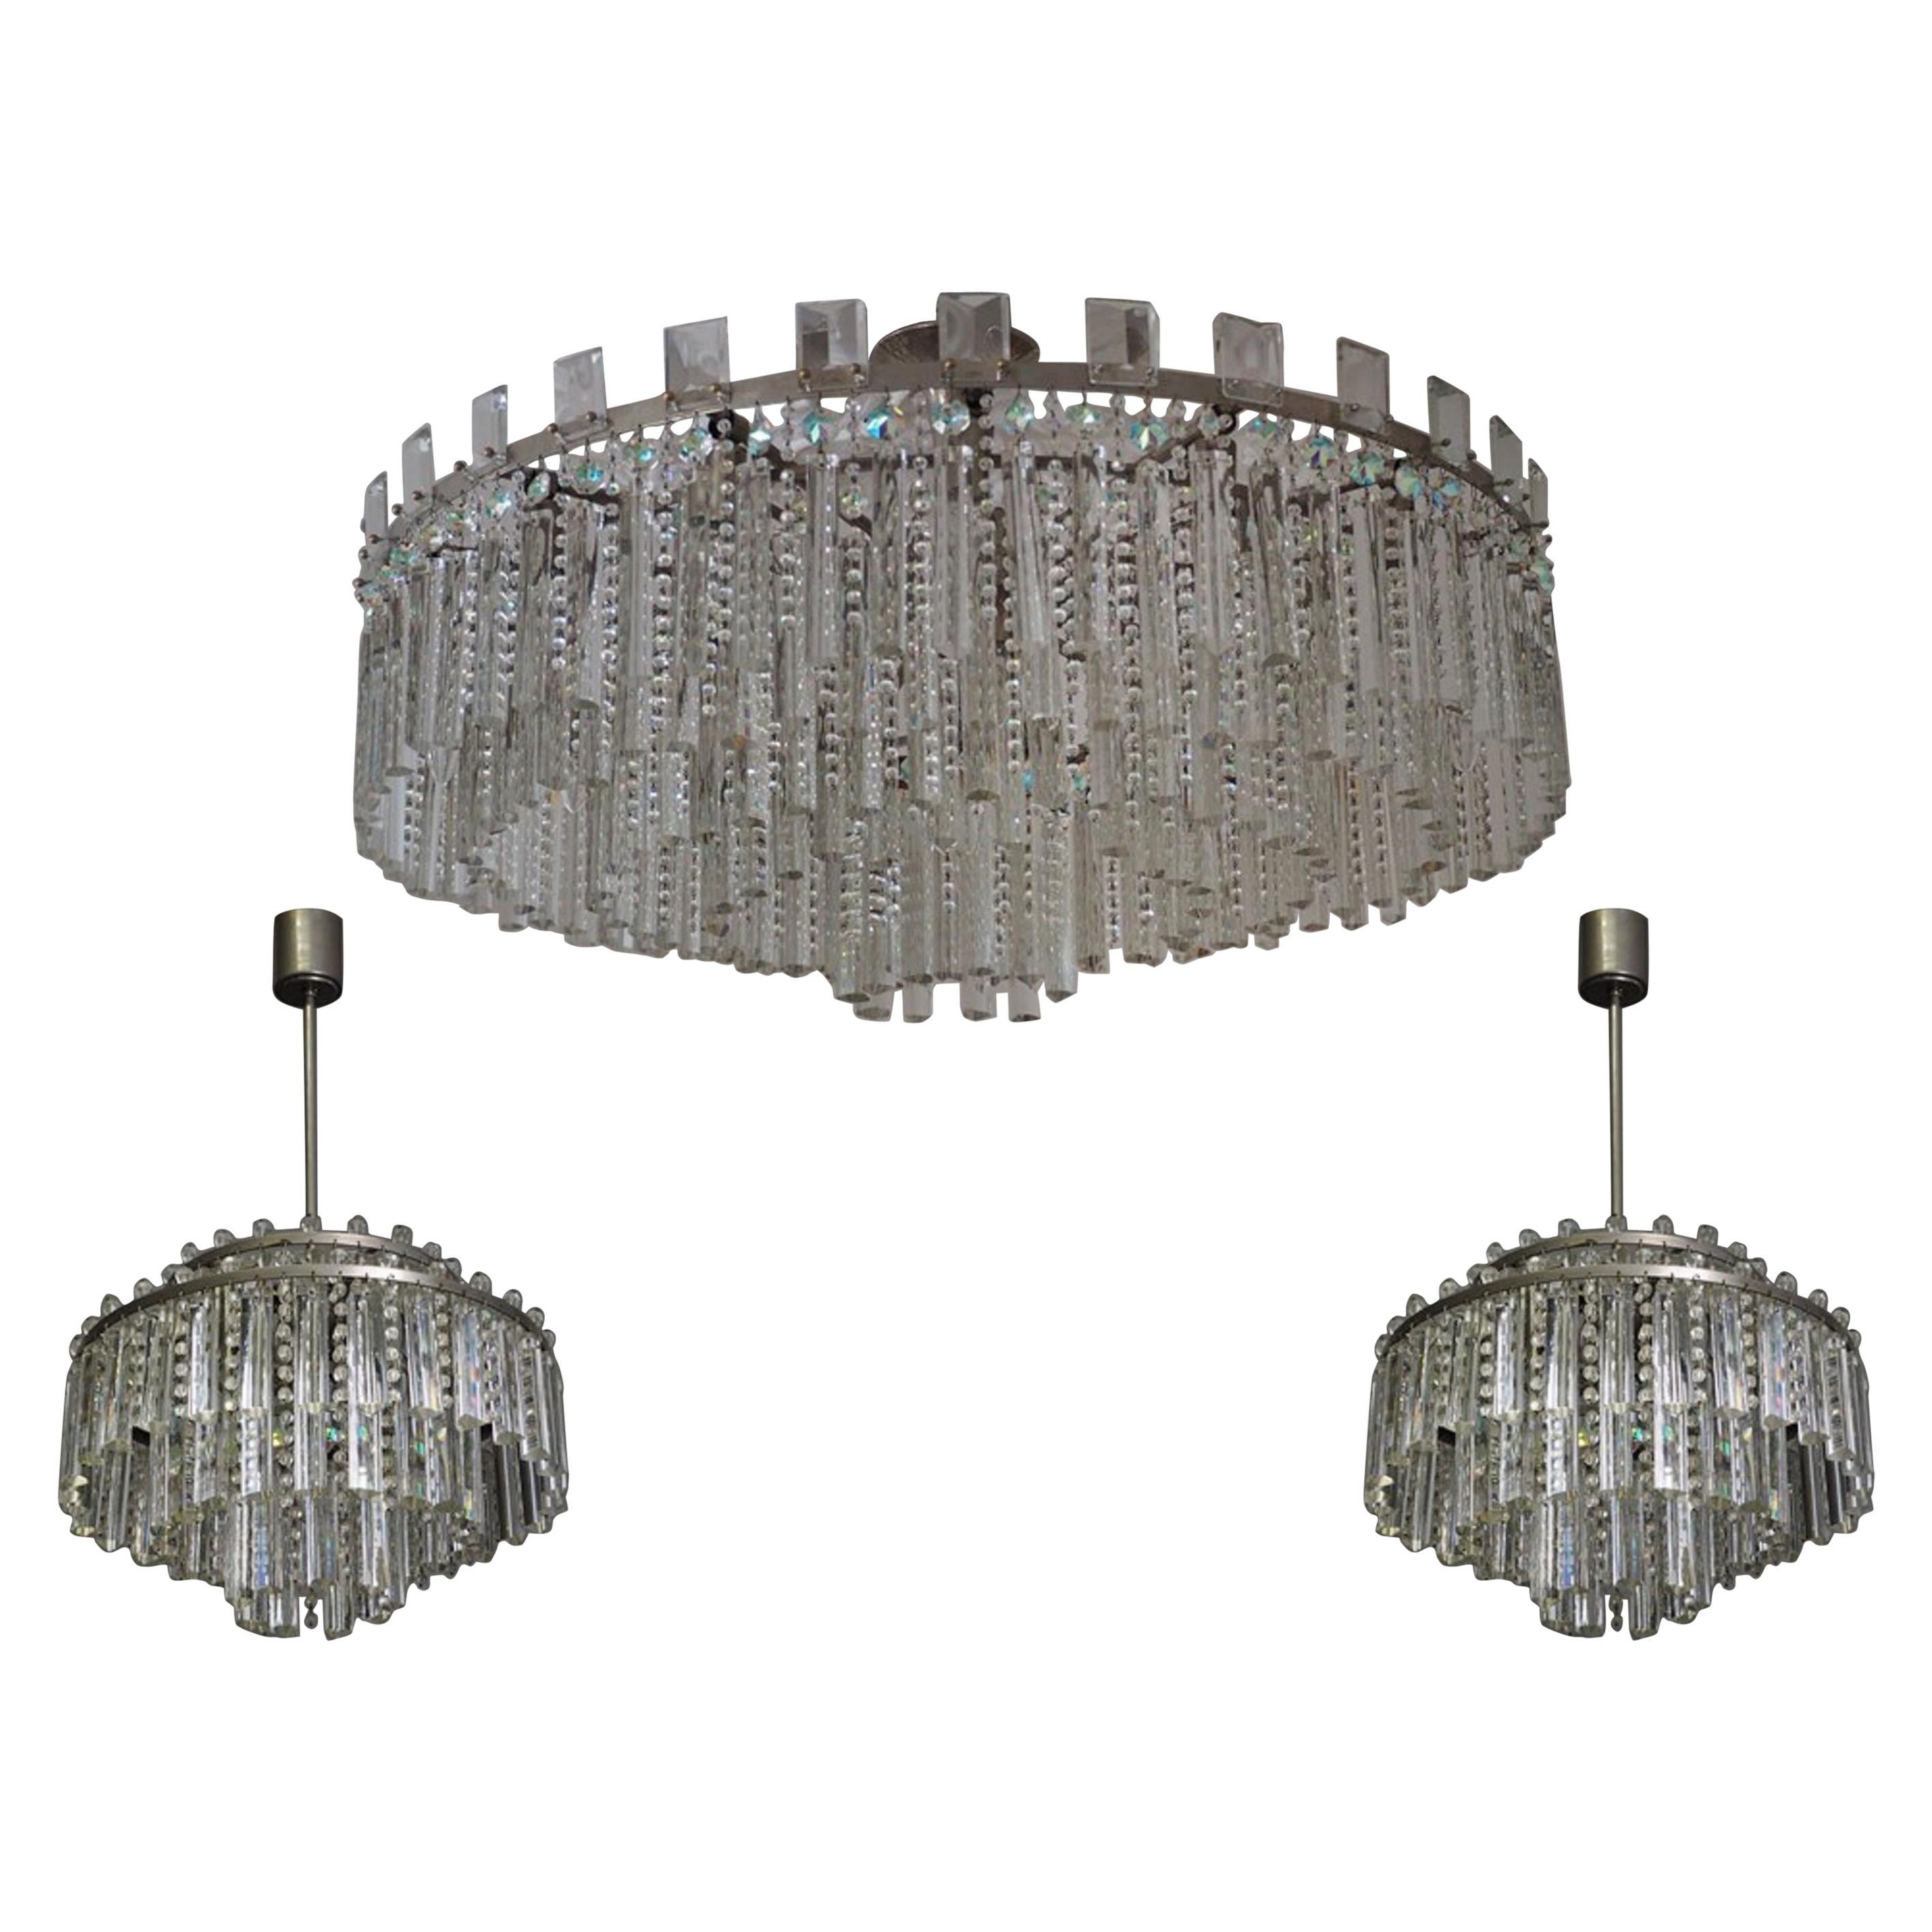 Stunning Set of Haevy Cut Glass and Nickel Chandeliers by Palwa, circa 1960s